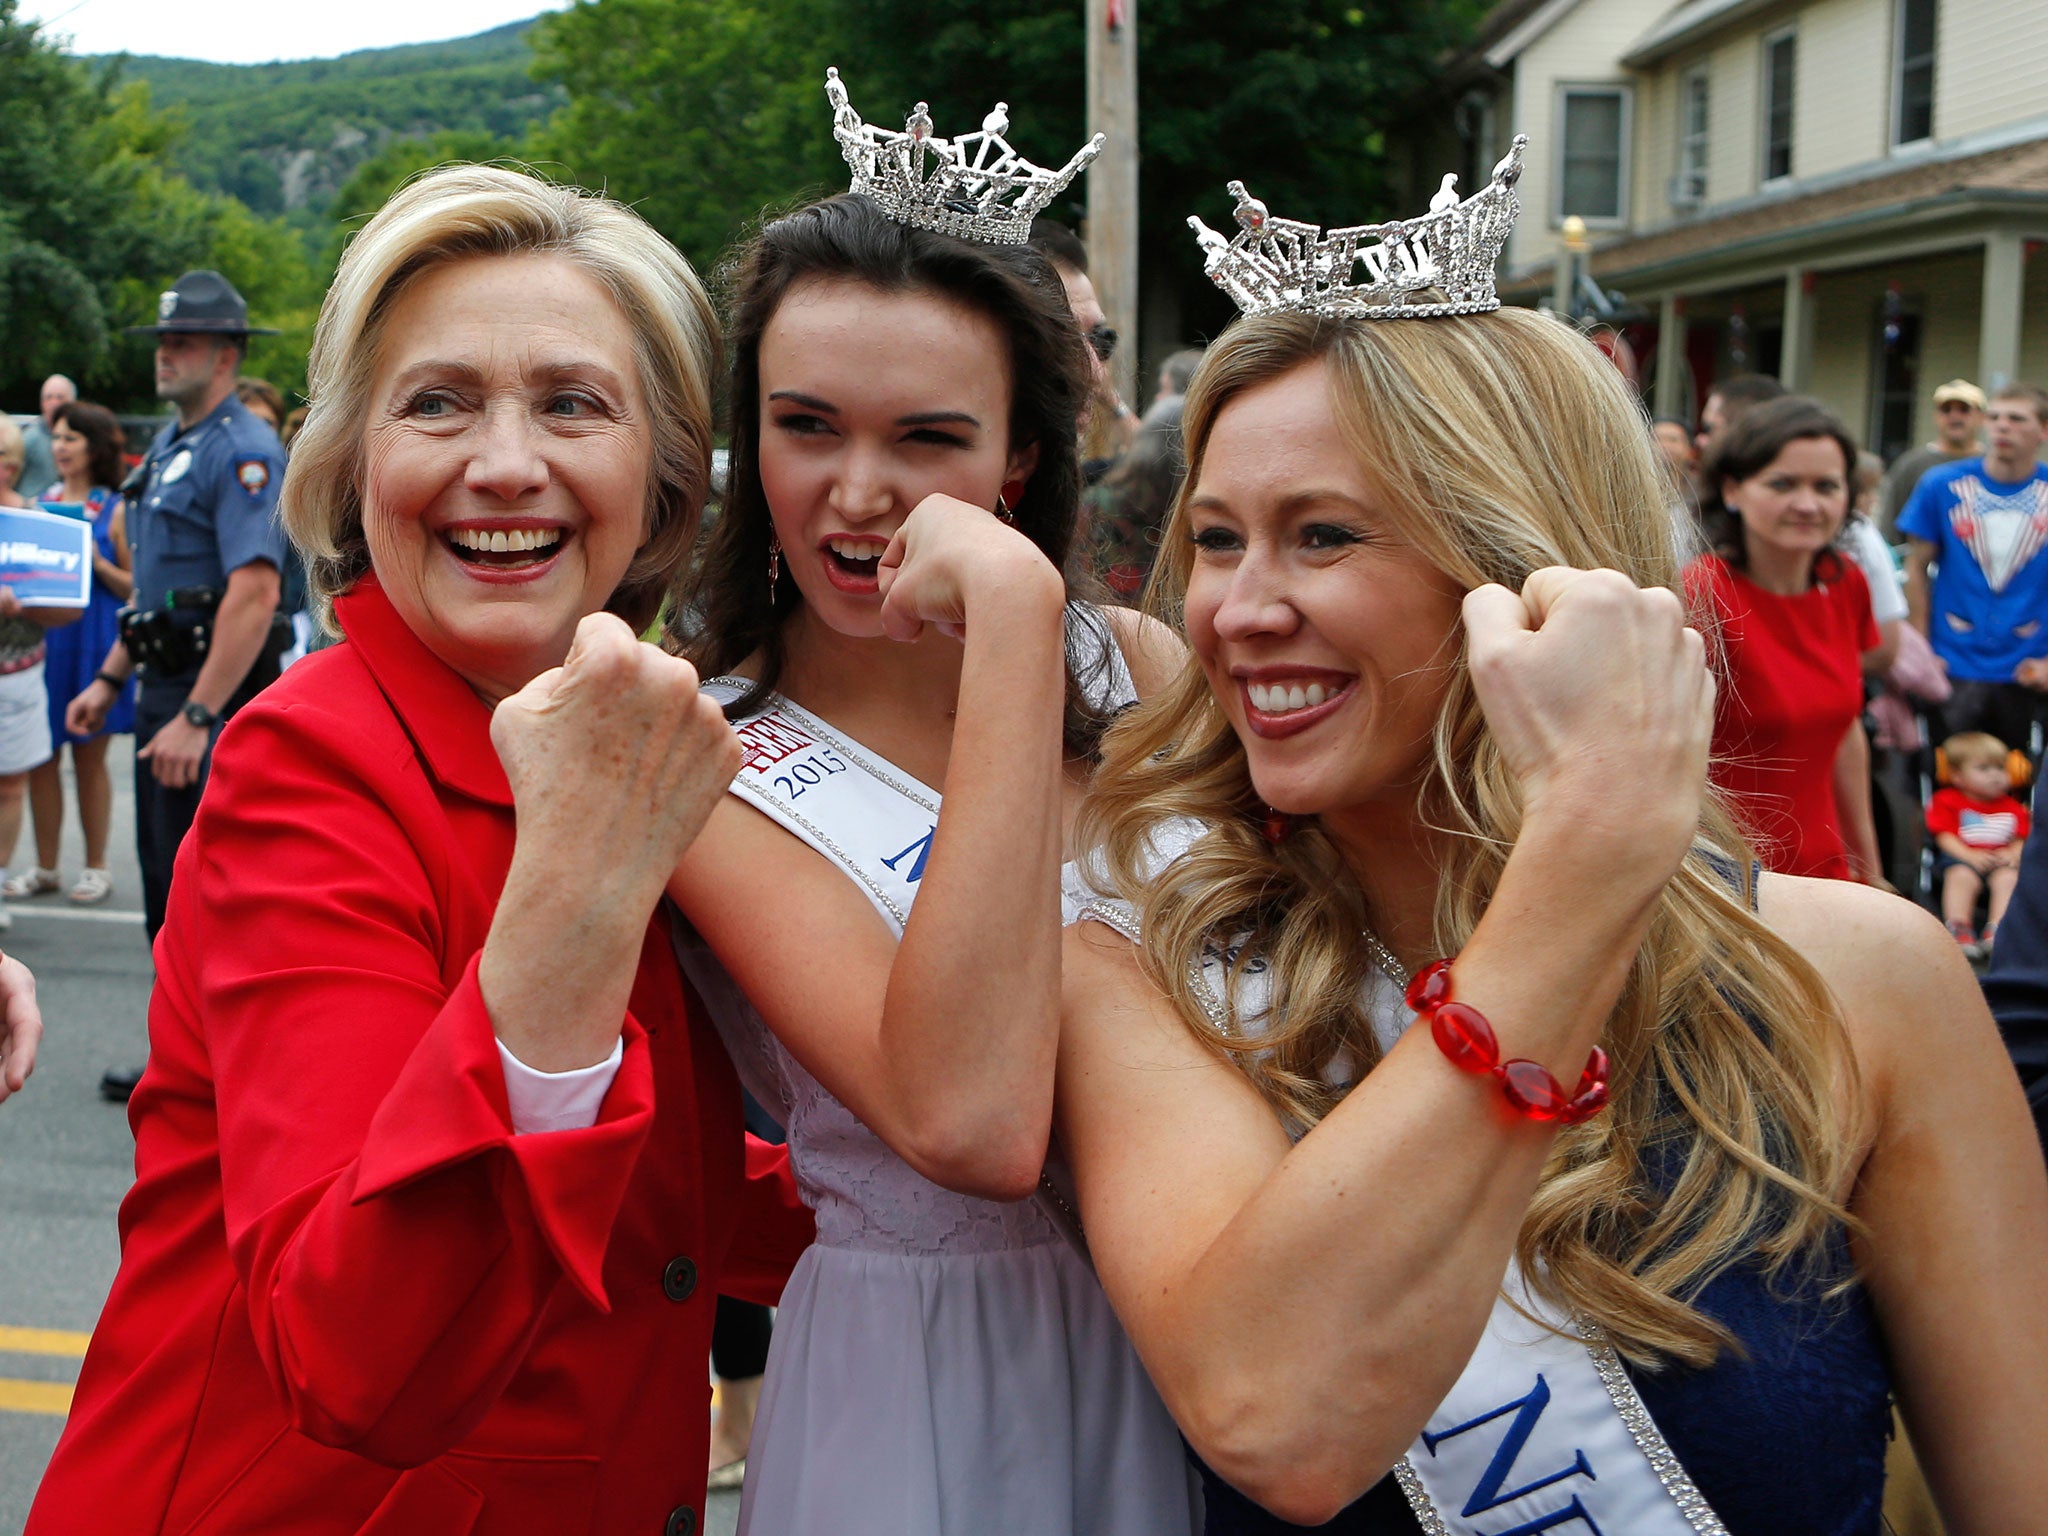 Democratic presidential candidate Hillary Rodham Clinton flexes her muscles with Miss Teen New Hampshire Allie Knault, center, and Miss New Hampshire Holly Blanchard, during a Fourth of July parade in Gorham, USA